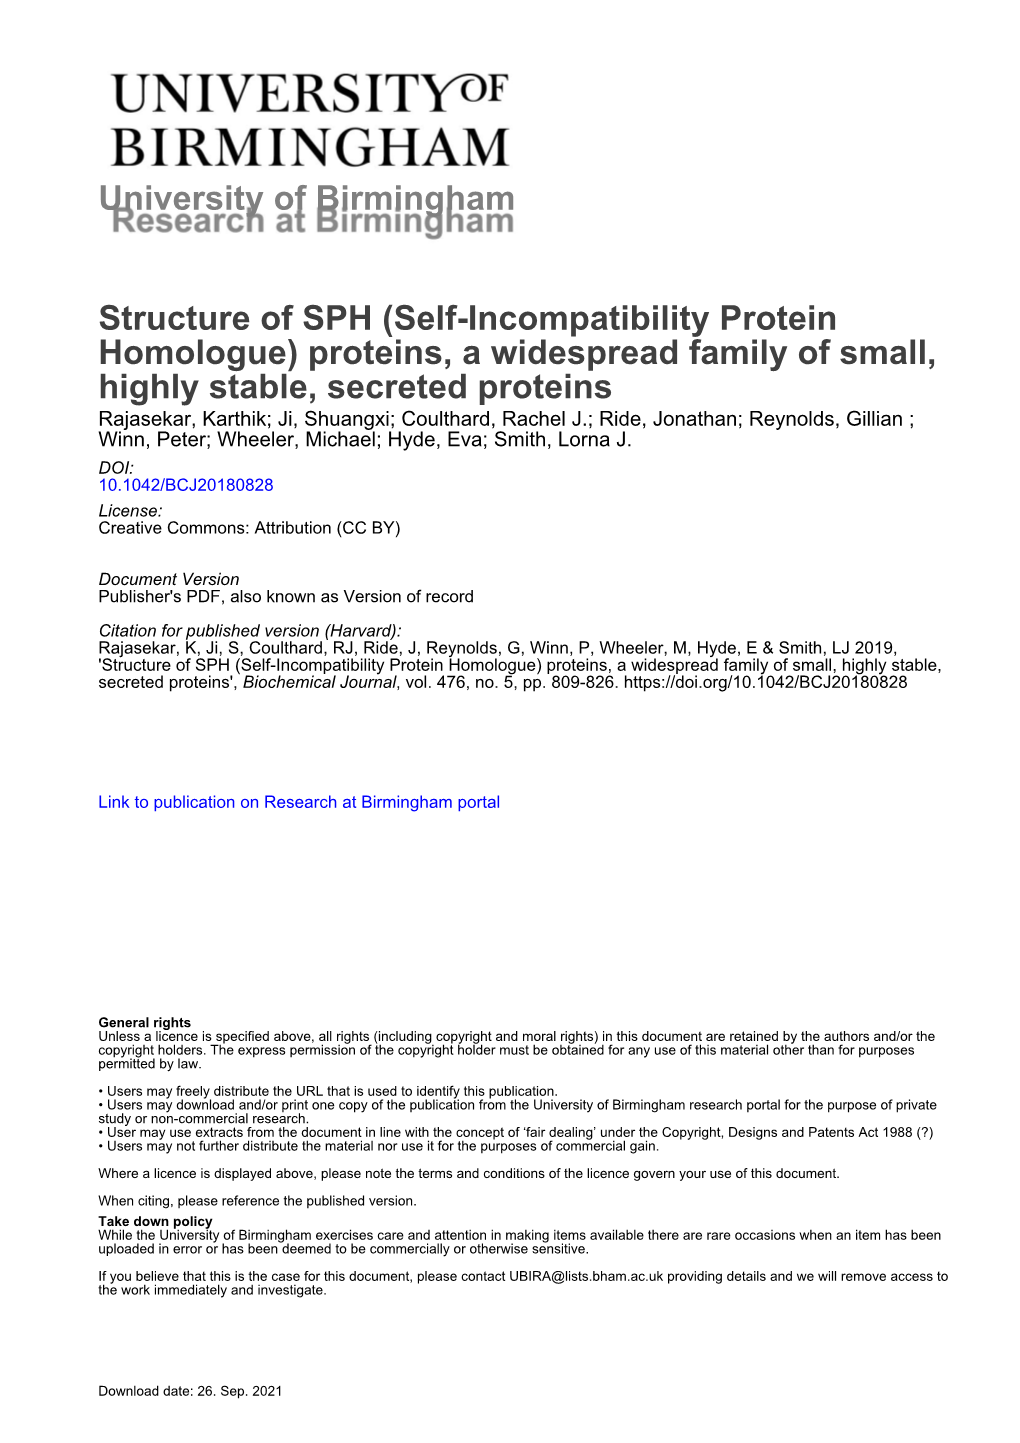 Structure of SPH (Self-Incompatibility Protein Homologue)